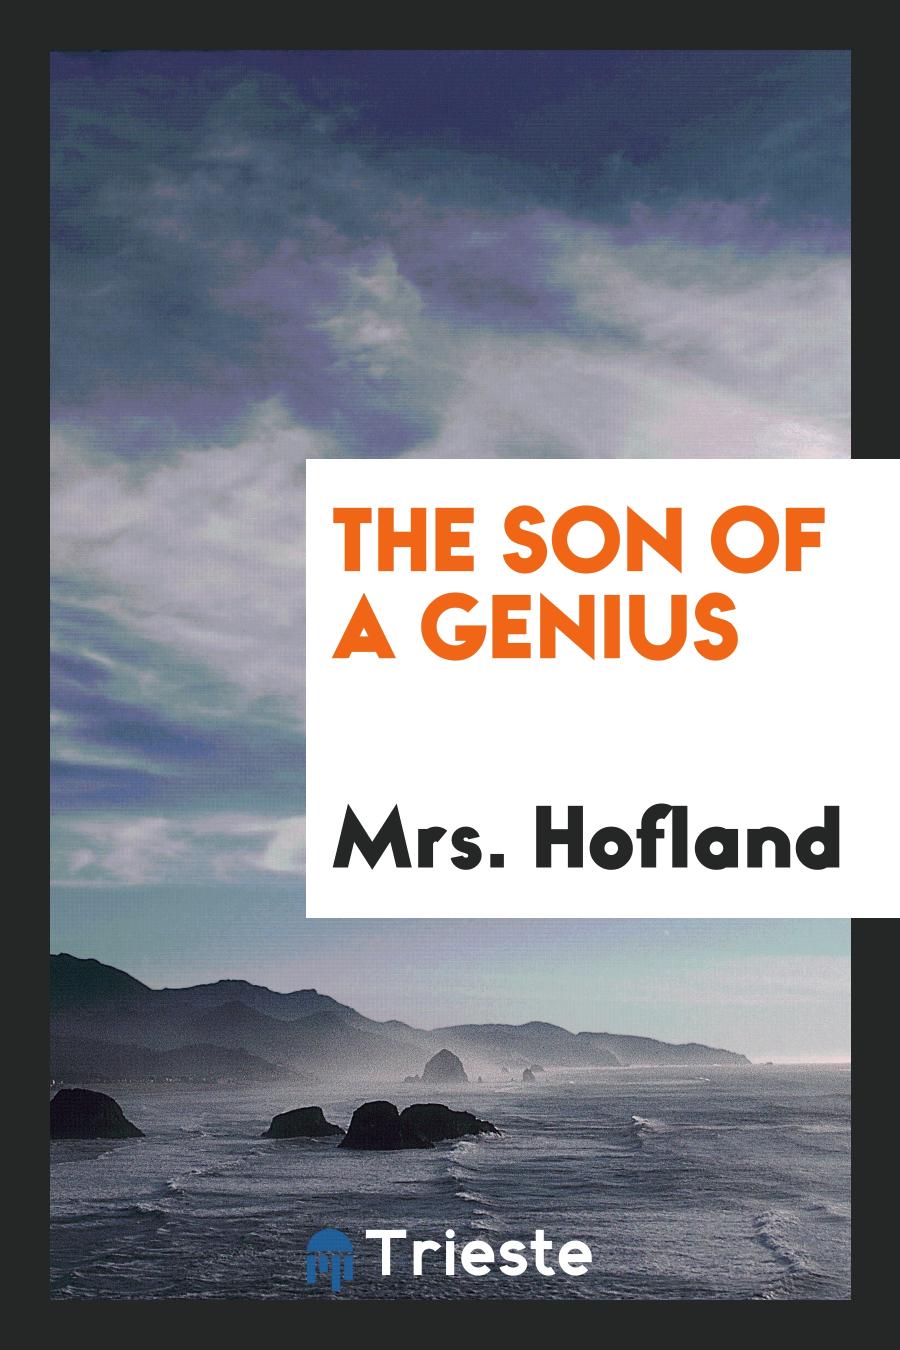 The Son of a Genius